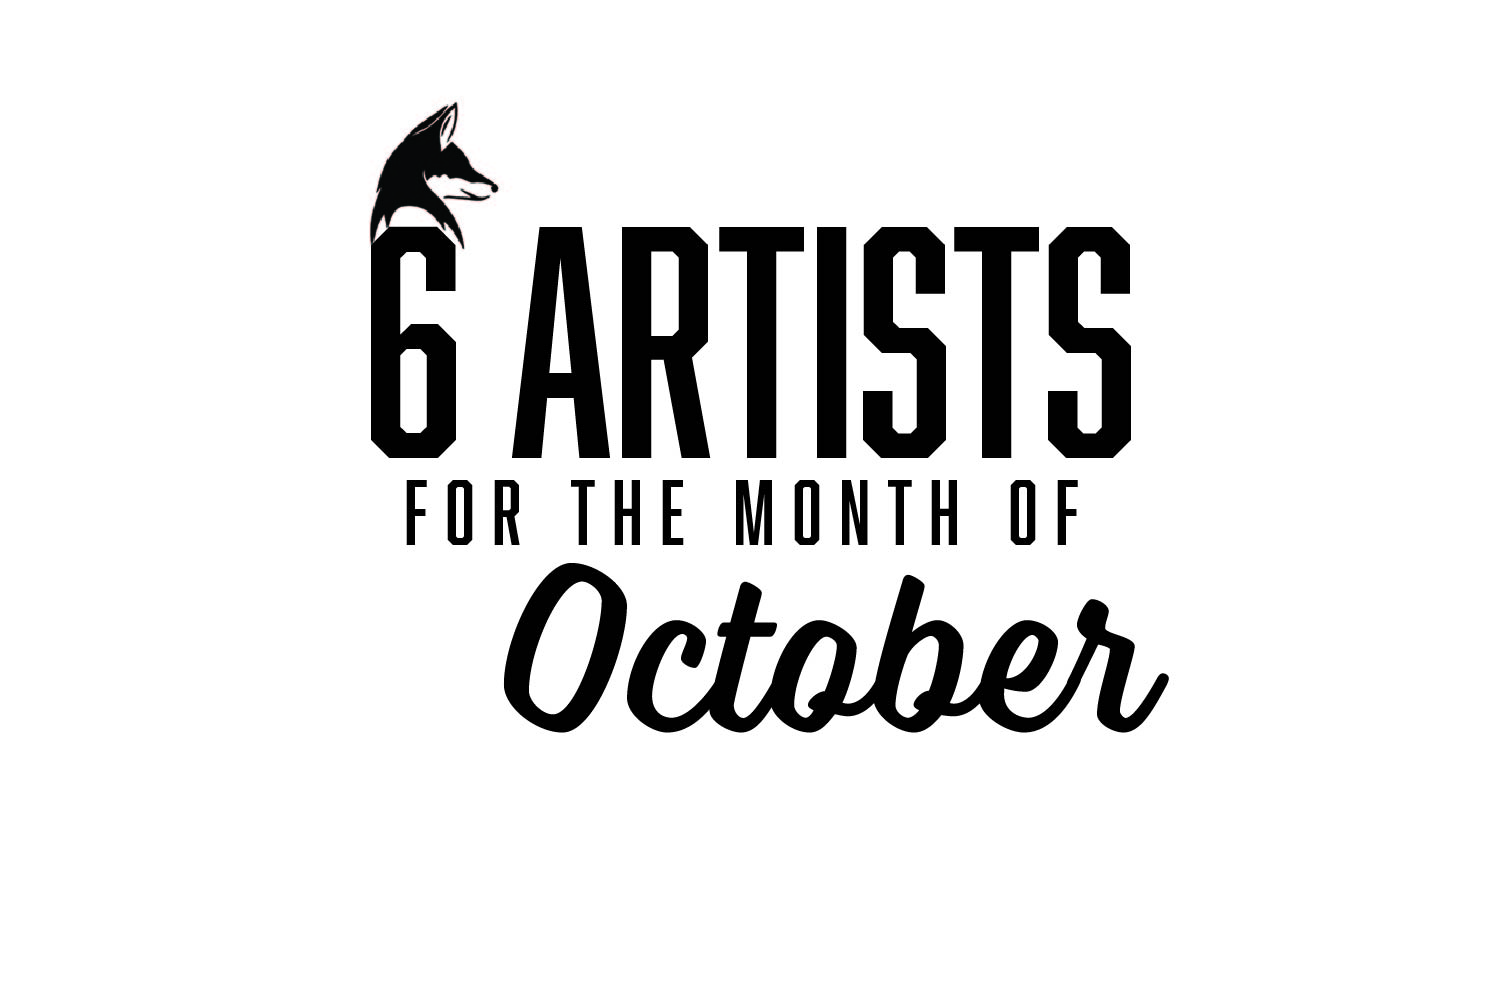 Six Artists You Should Be Listening To: October 2020 EDITION